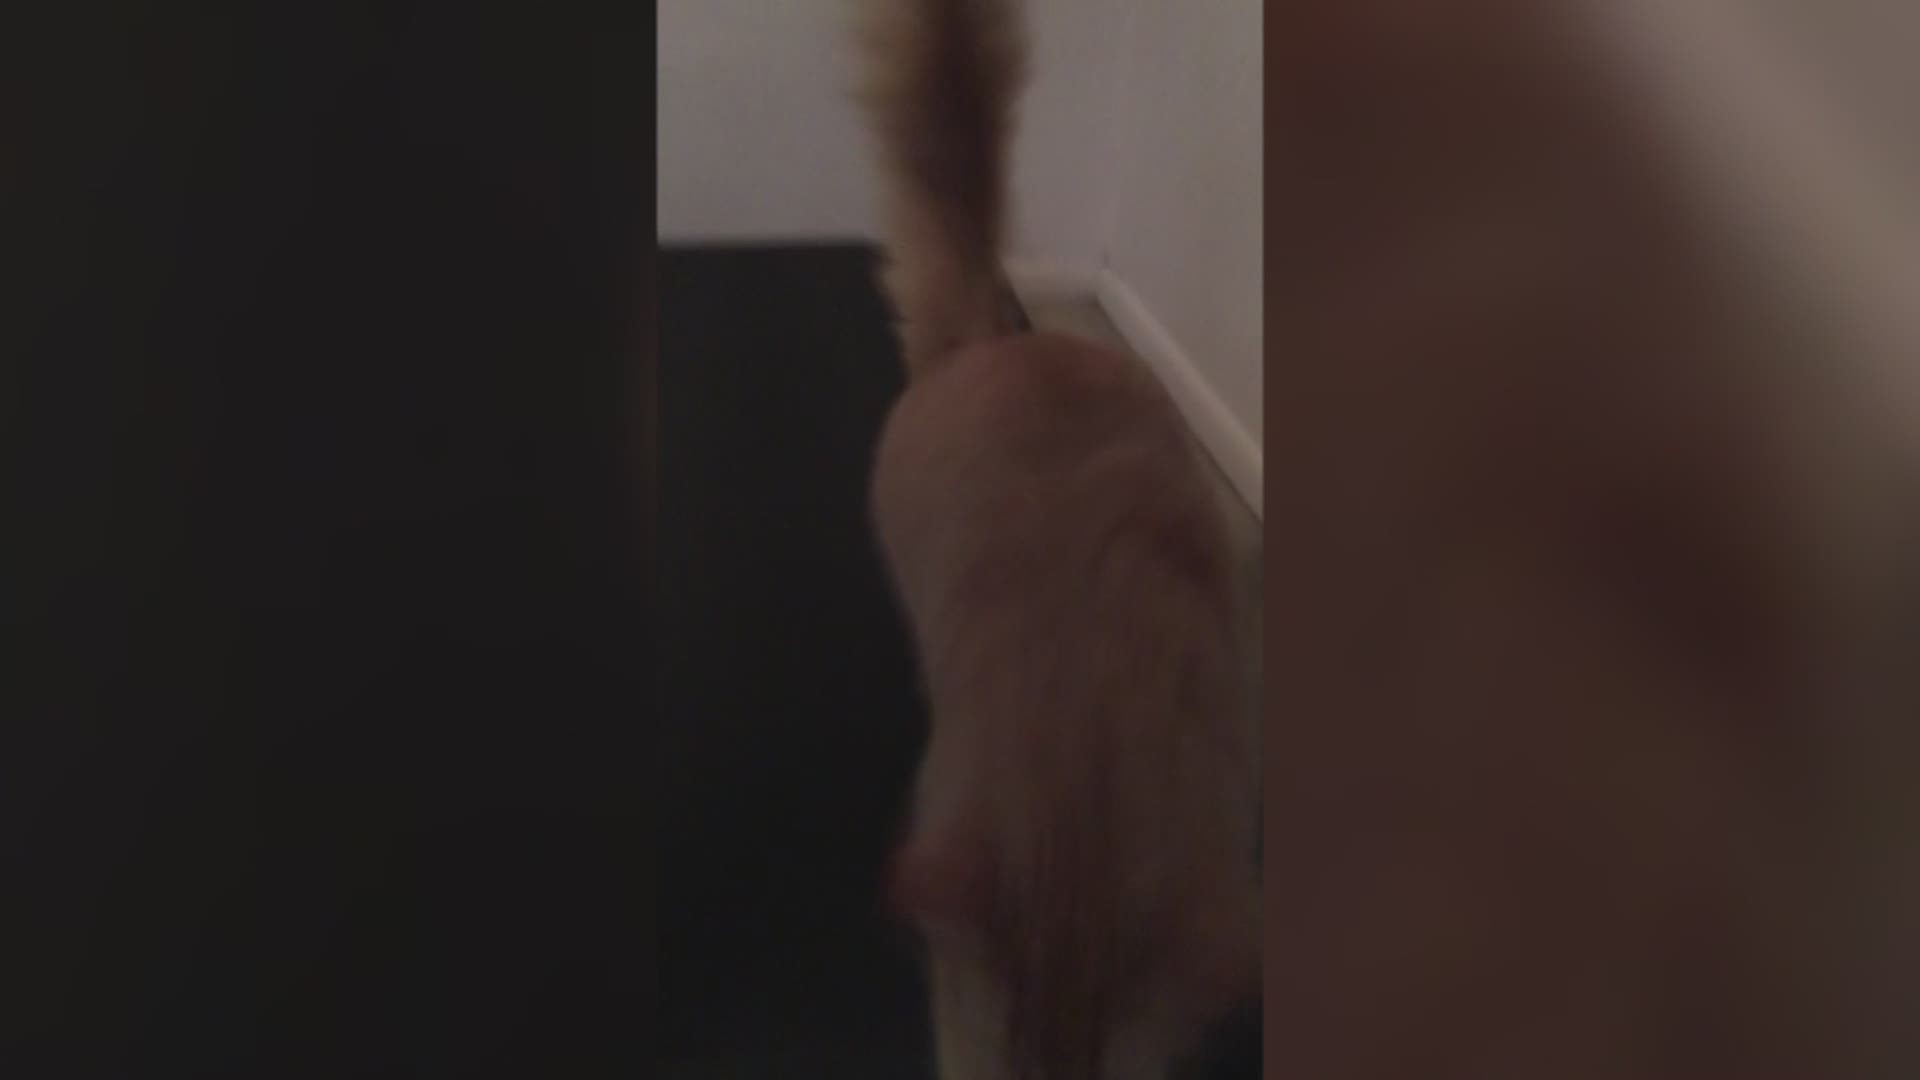 Elaine Rudolph of Norfolk shared video with 13News Now of one of her rescue kitties, Oliver, staying in shape using a treadmill.